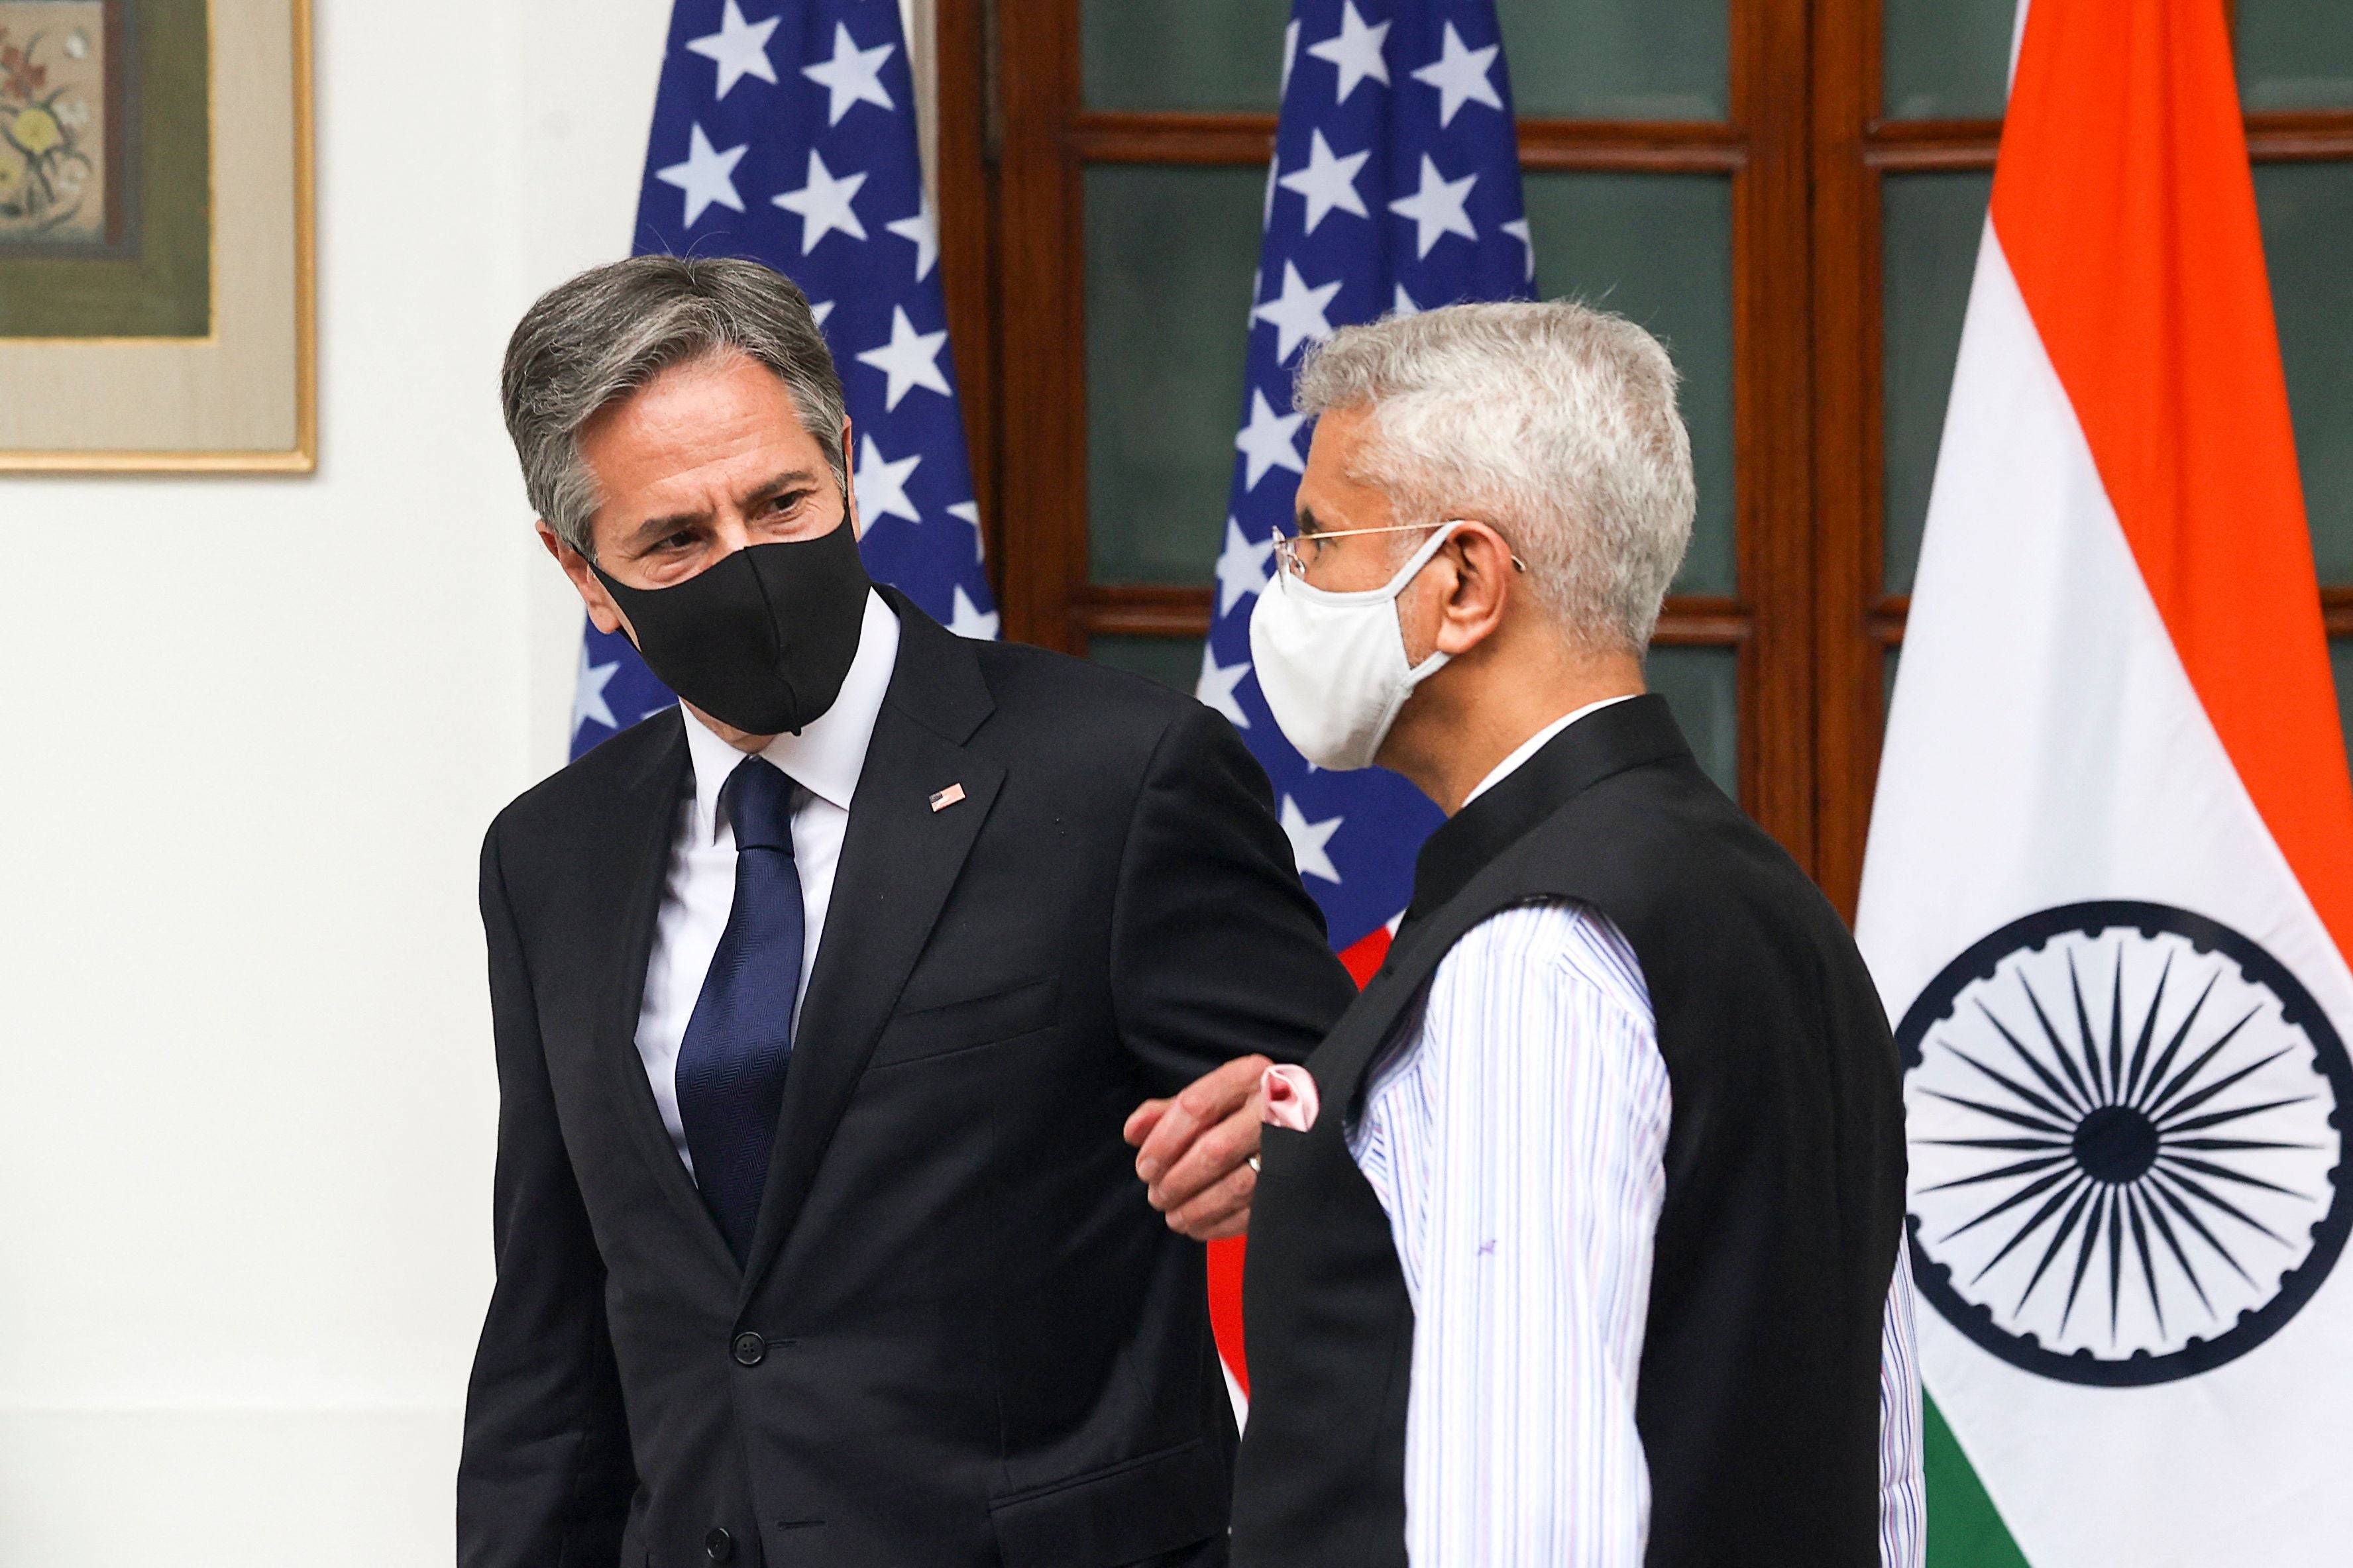 Mr Blinken thought to reassure India over Afghanistan